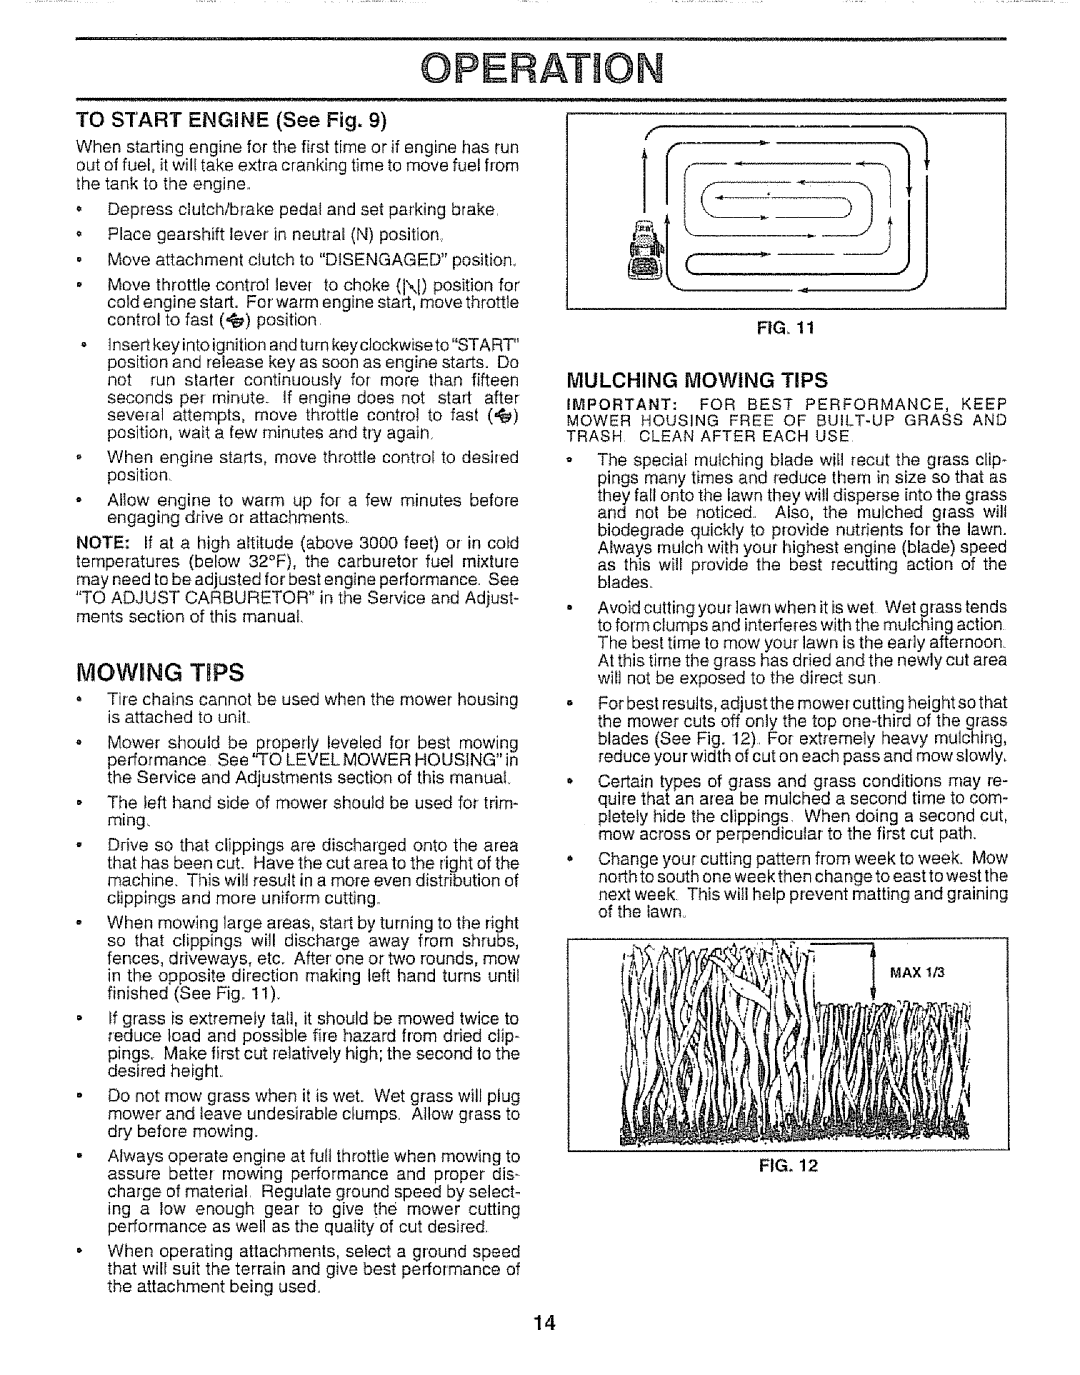 Sears 917.257651 owner manual Oiperatjon, Mowing T Ps, TO START ENGINE See Fig, Mulching Mowing Tips 